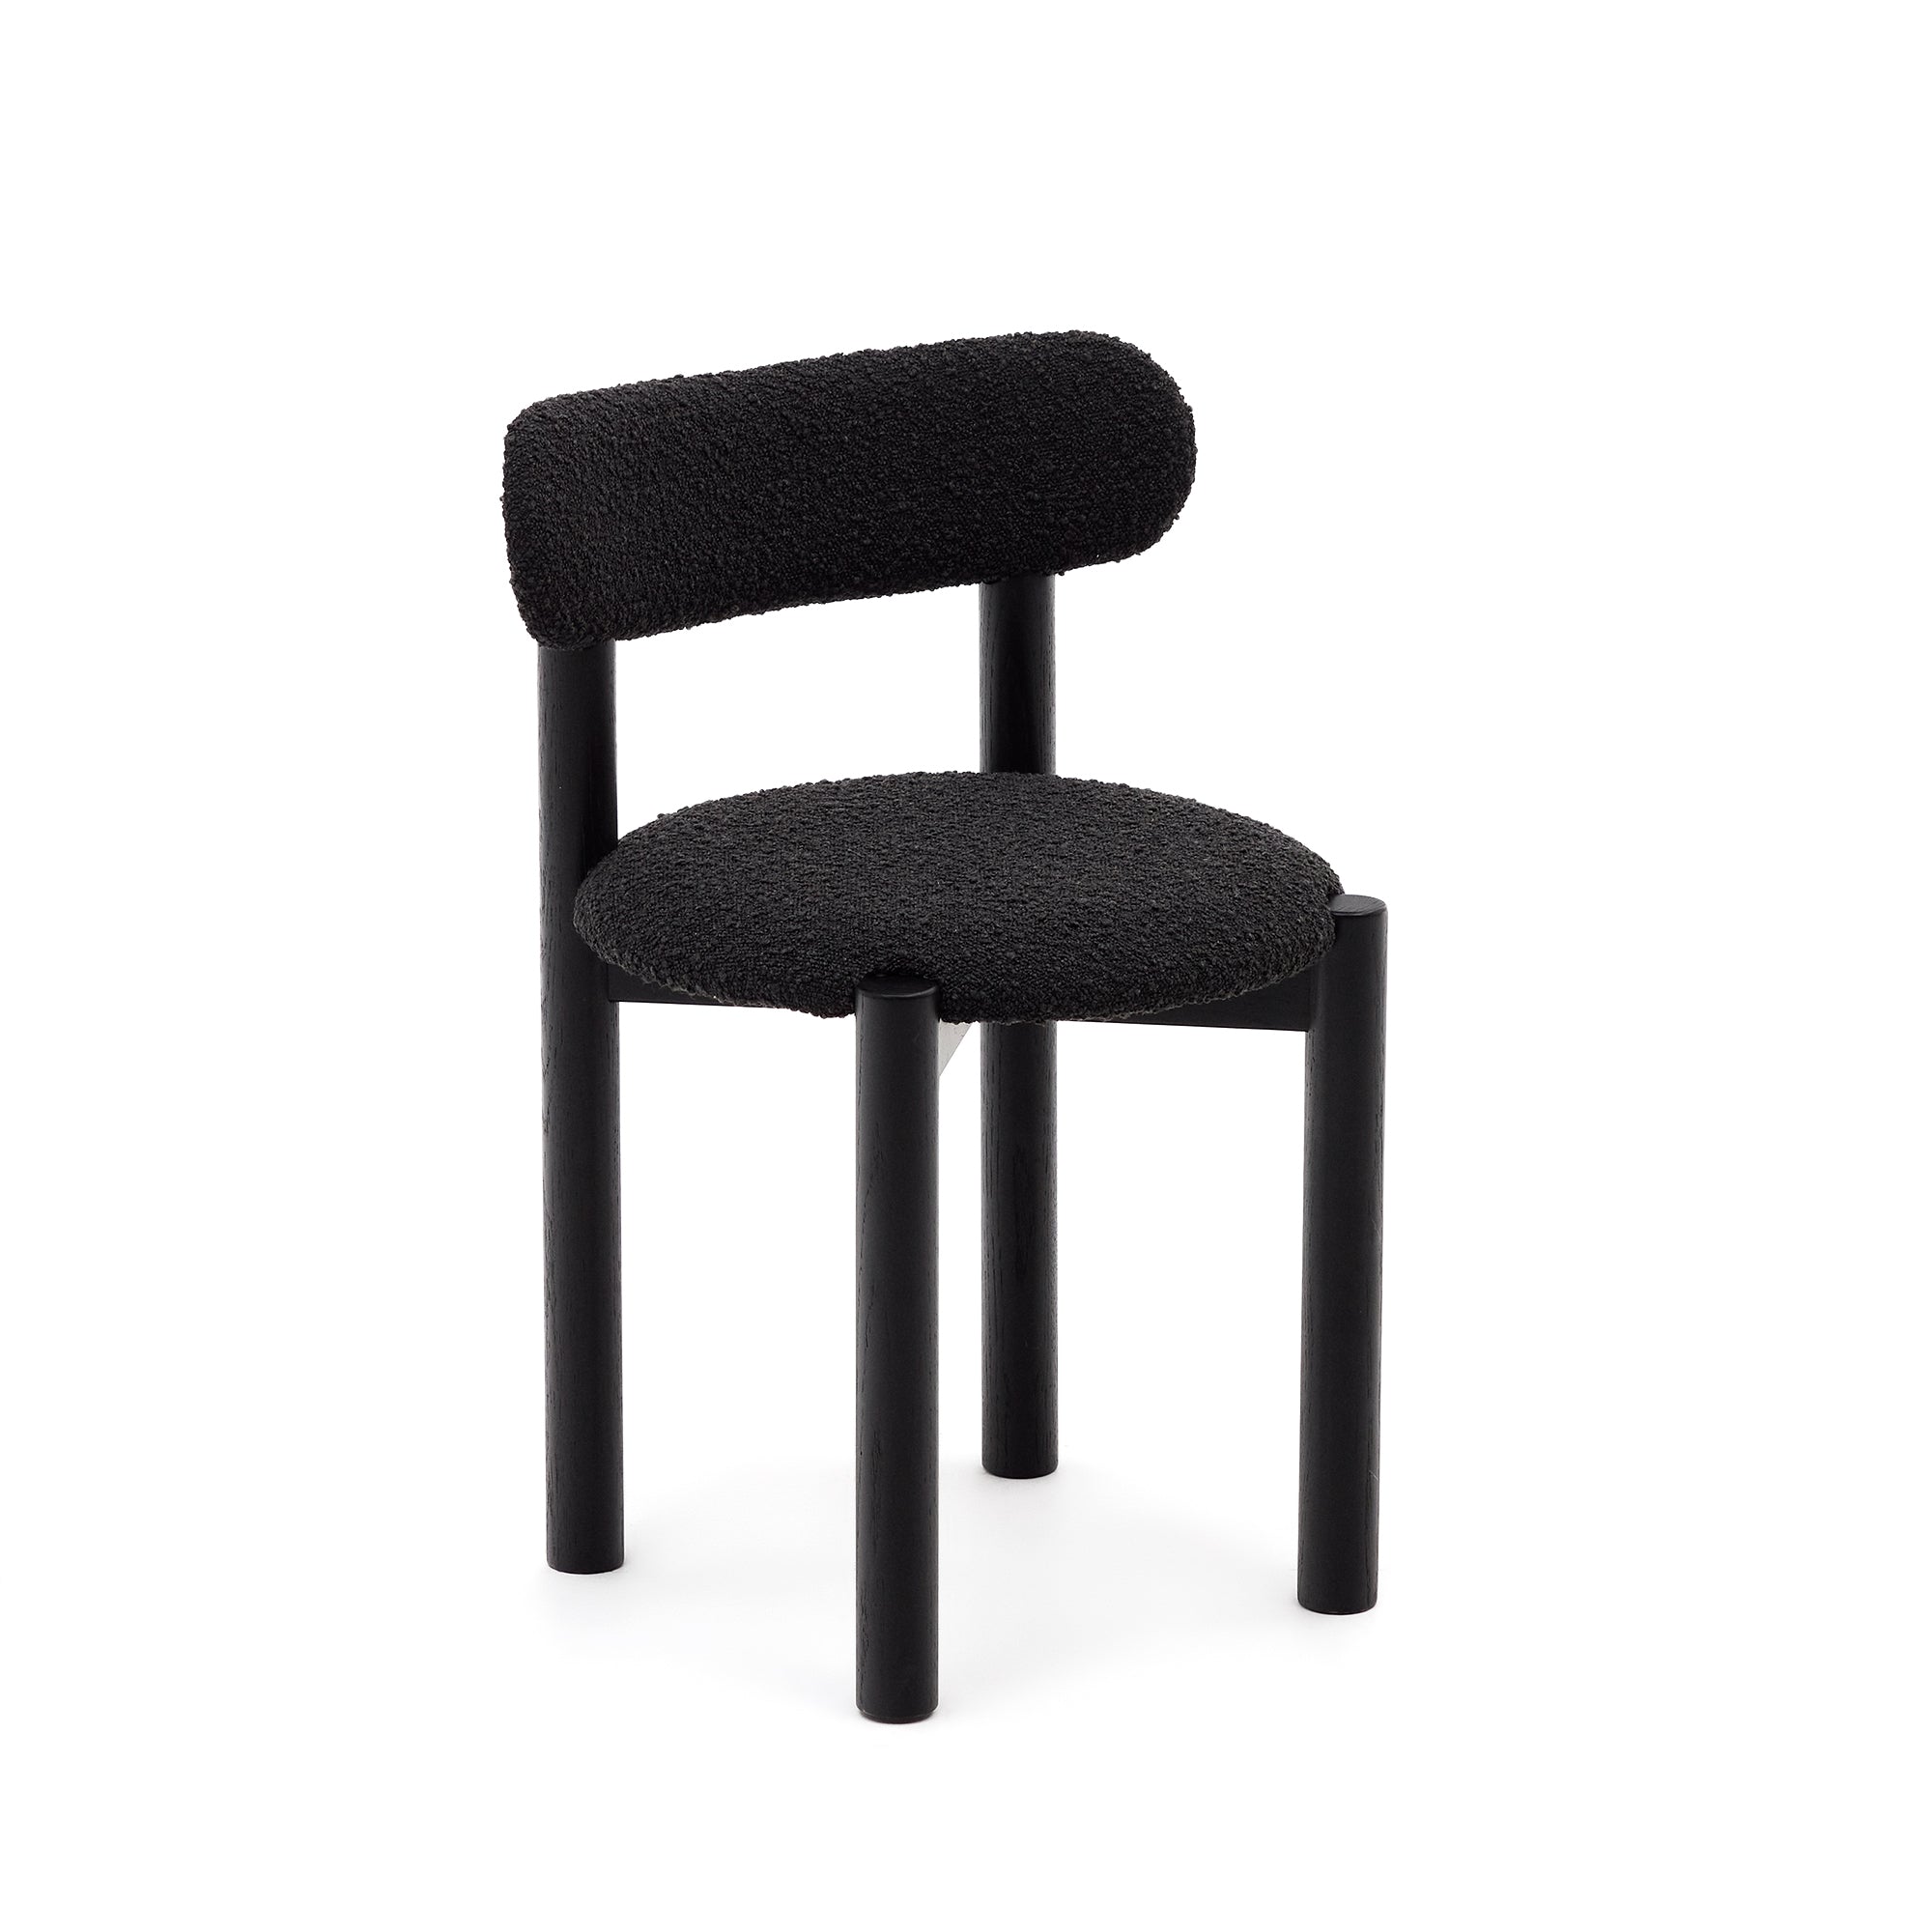 Nebai chair in black fleece and solid oak wood structure with black finish